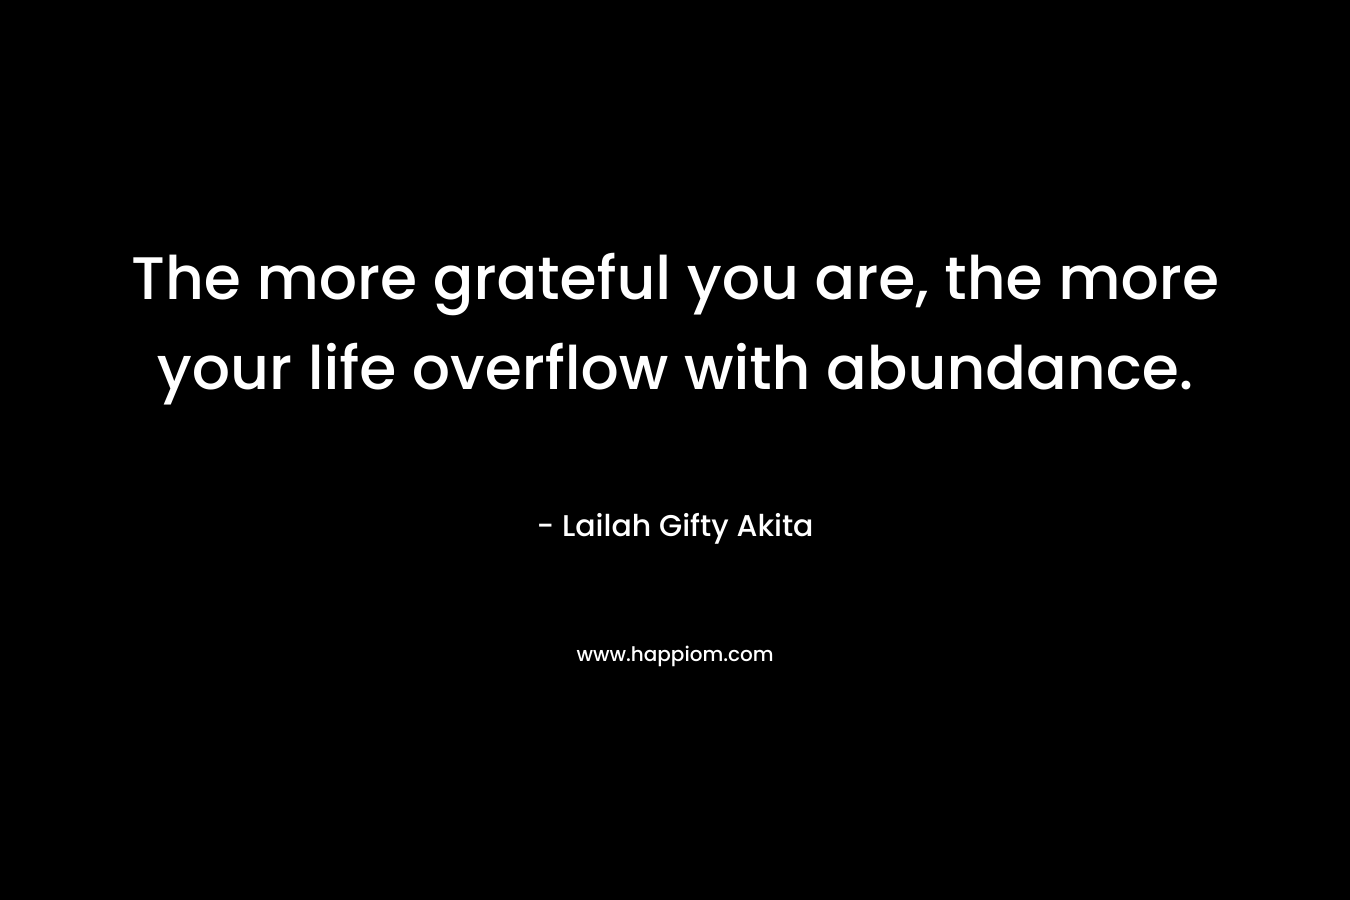 The more grateful you are, the more your life overflow with abundance.